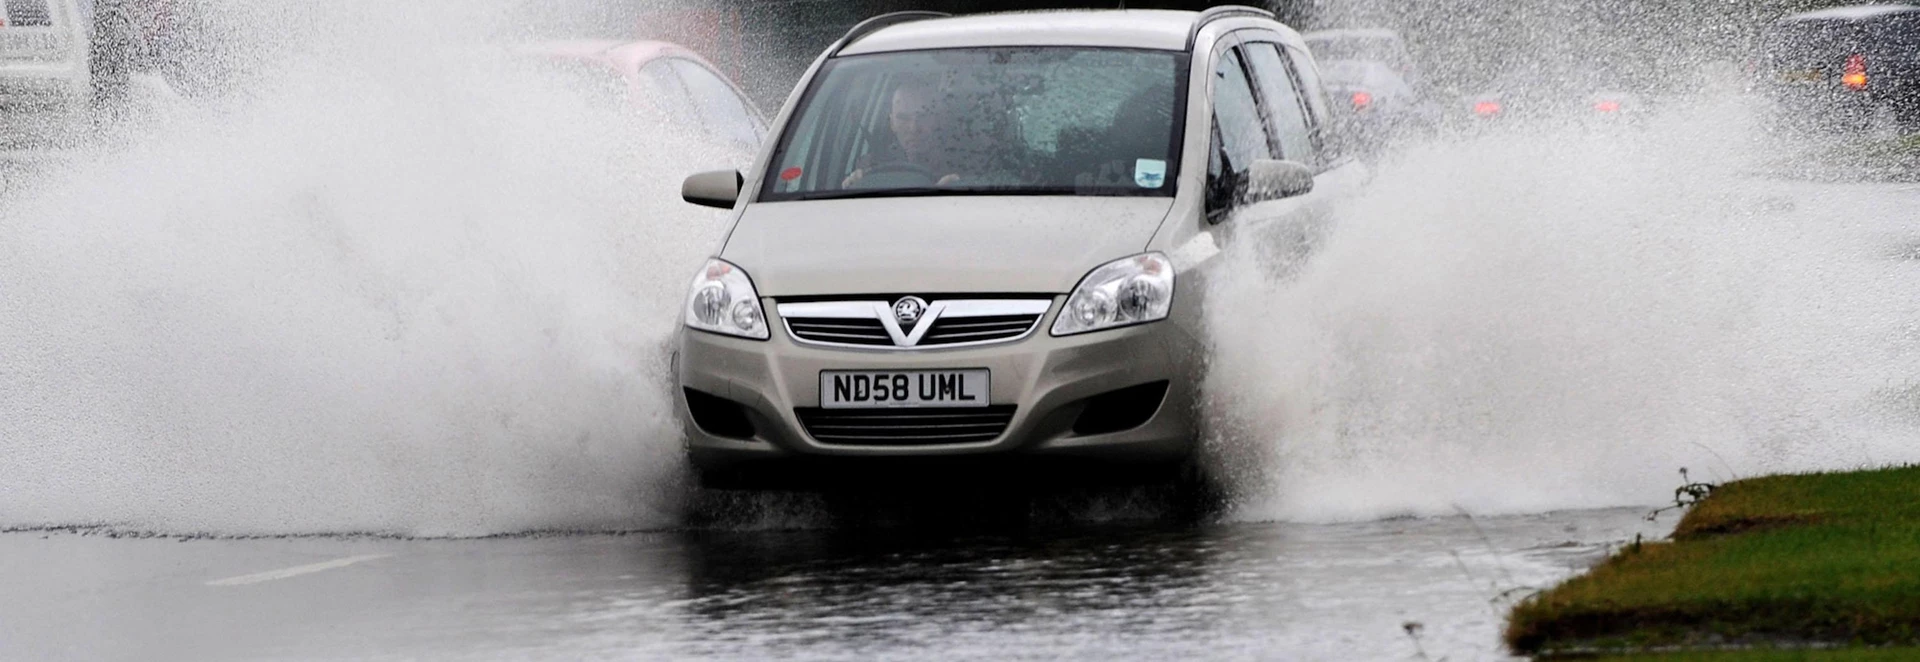 Drivers face £5,000 Fine & Penalty Points for splashing pedestrians with puddles 